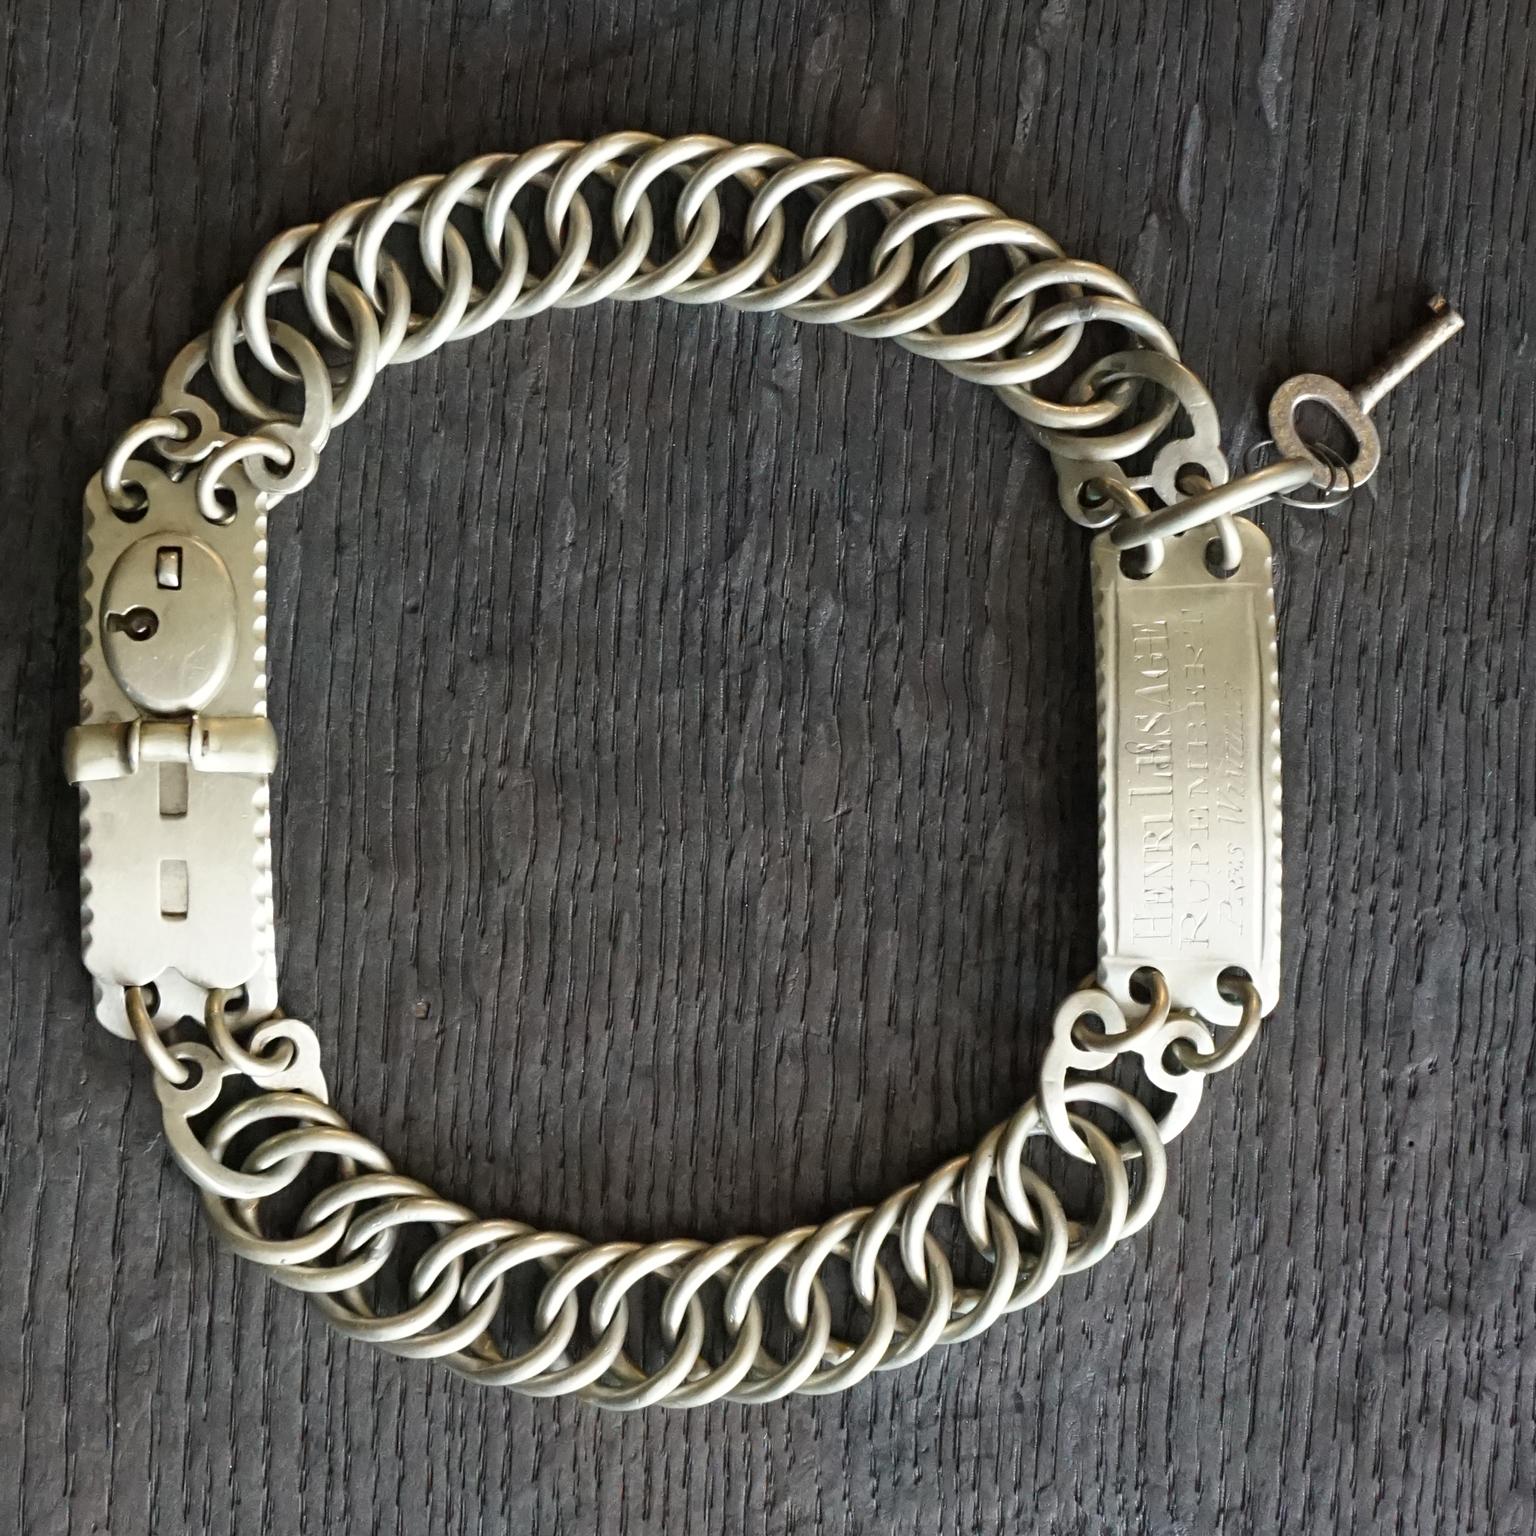 An antique white metal or nickel silver adjustable round double linked collar, probably from a posh French 'Chateau' dog.
With working lock and key and very pretty engraved name tag with owners French address in the North of France near the Belgium